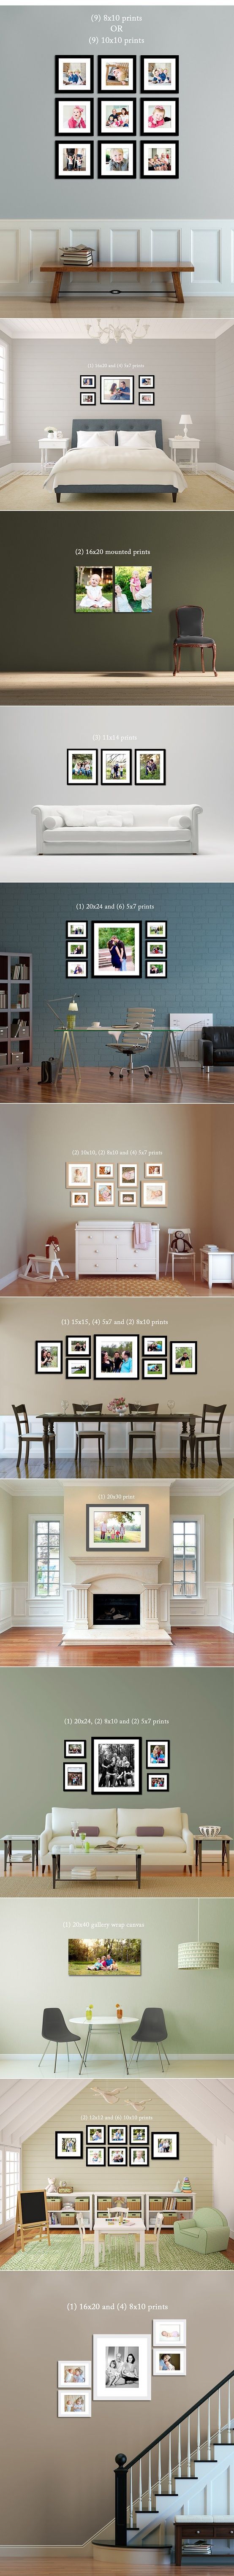 Picture hanging ideas. Can easily combine this into your space and visualize you